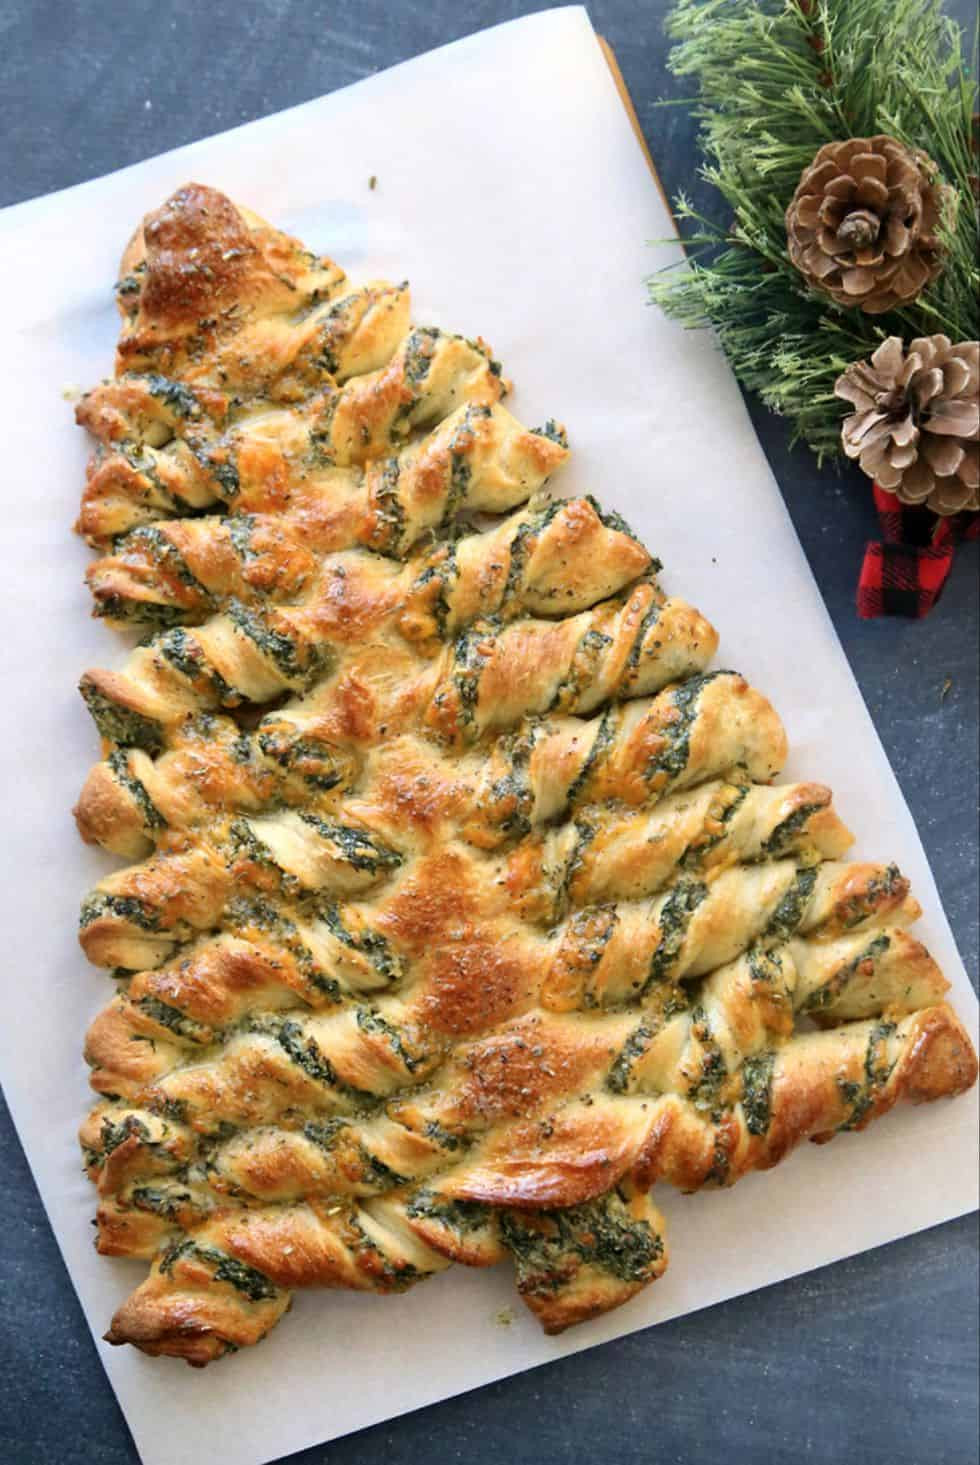 Great Holiday Party Food Ideas
 15 Christmas Party Food Ideas That Will Top Previous Years